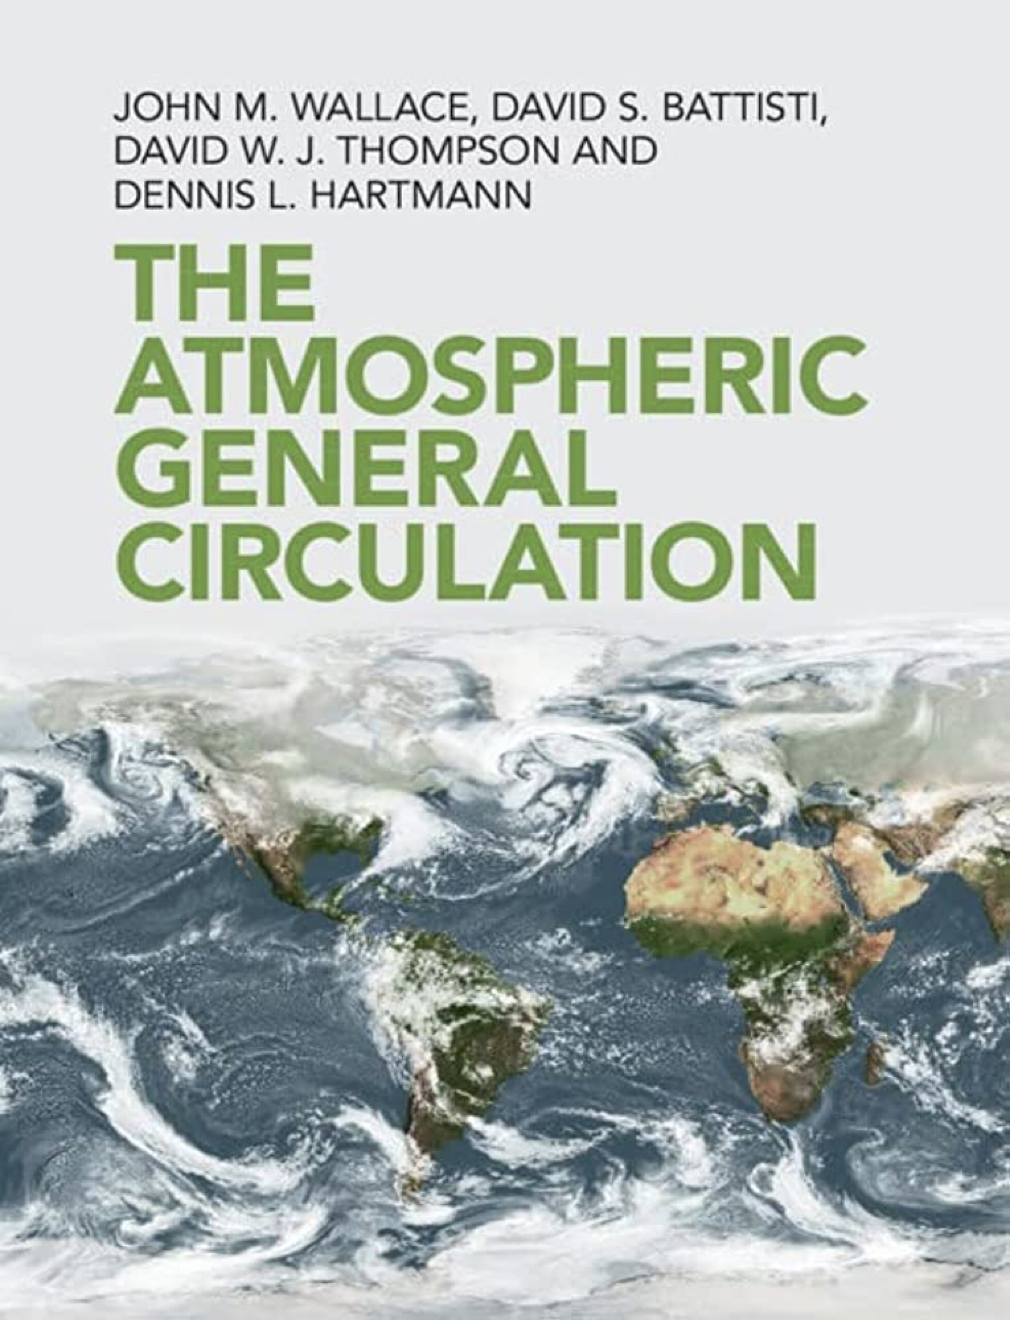 Image of the Atmospheric General Circulation Book Cover